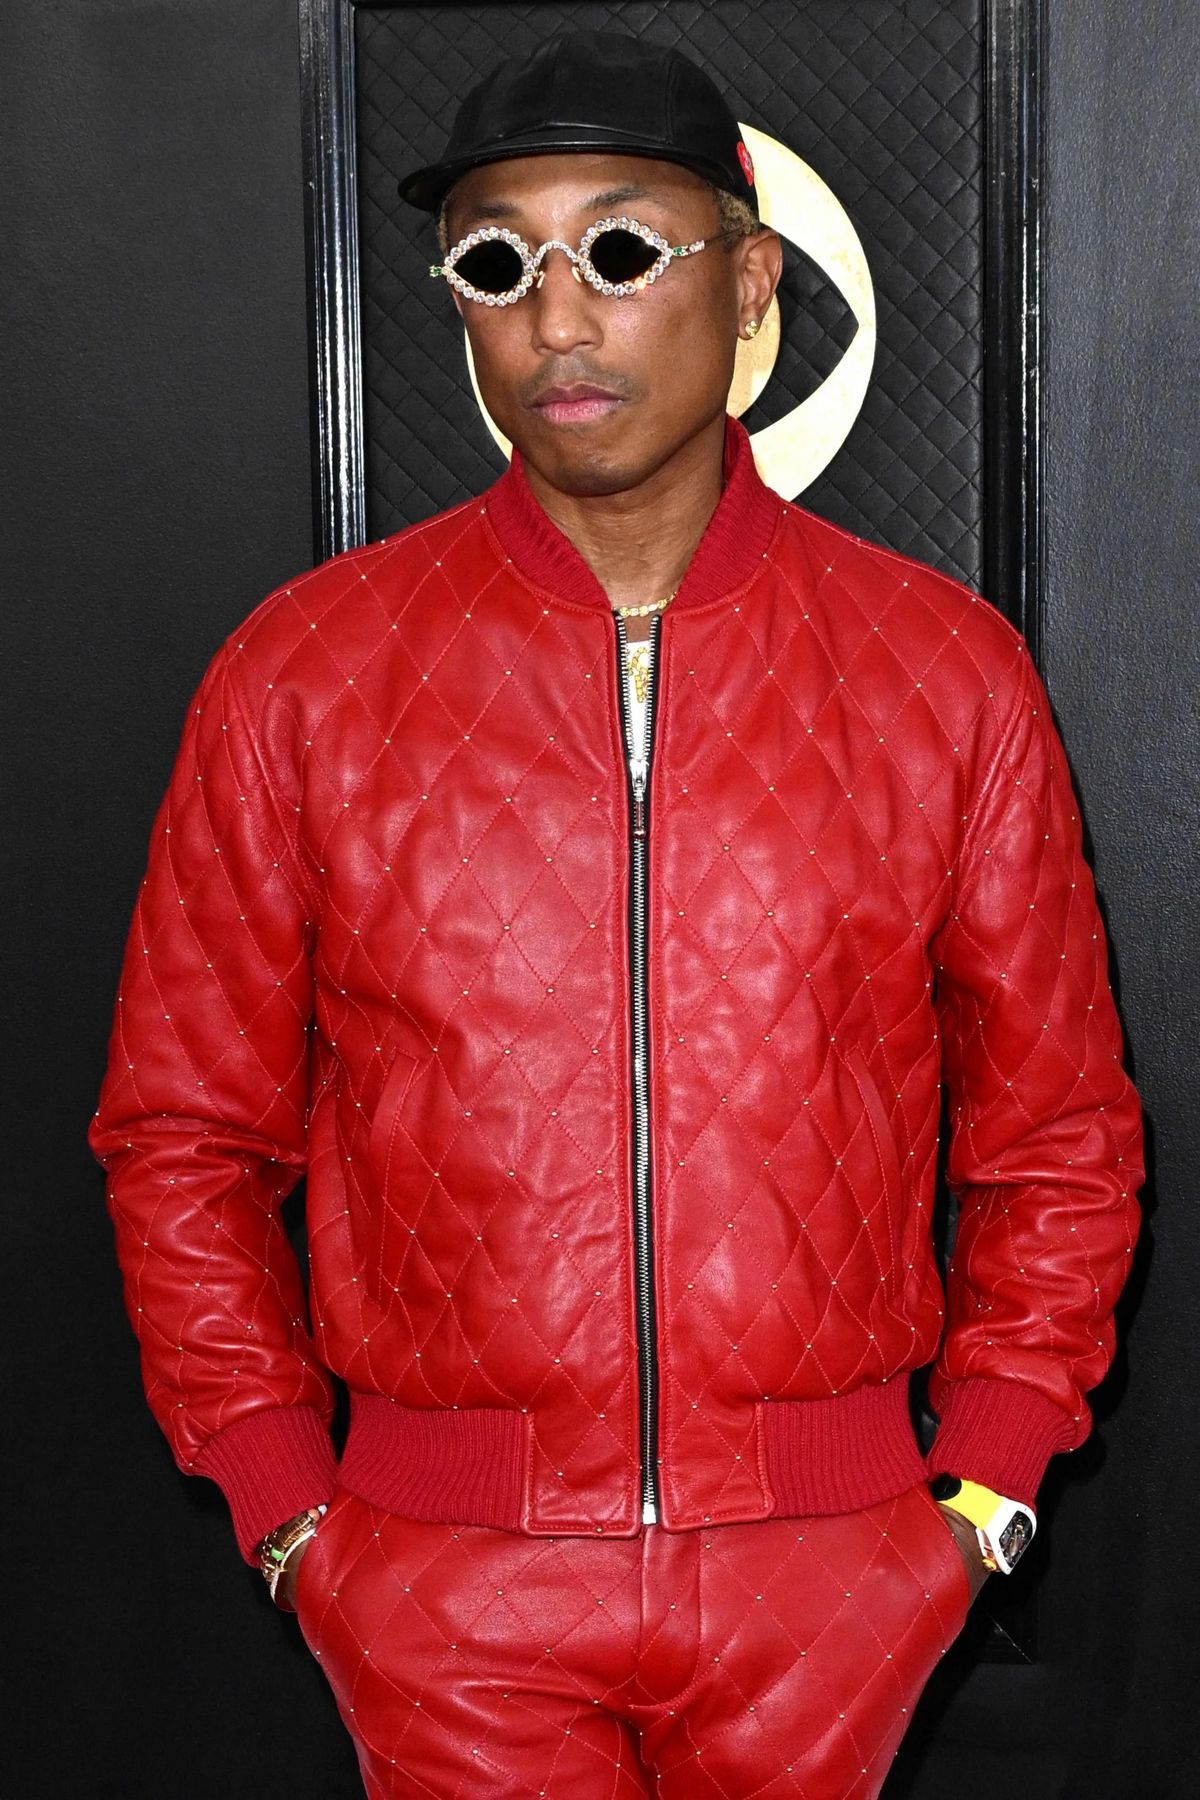 Pharrell says 'Louis Vuitton Don' is still Kanye West - Los Angeles Times